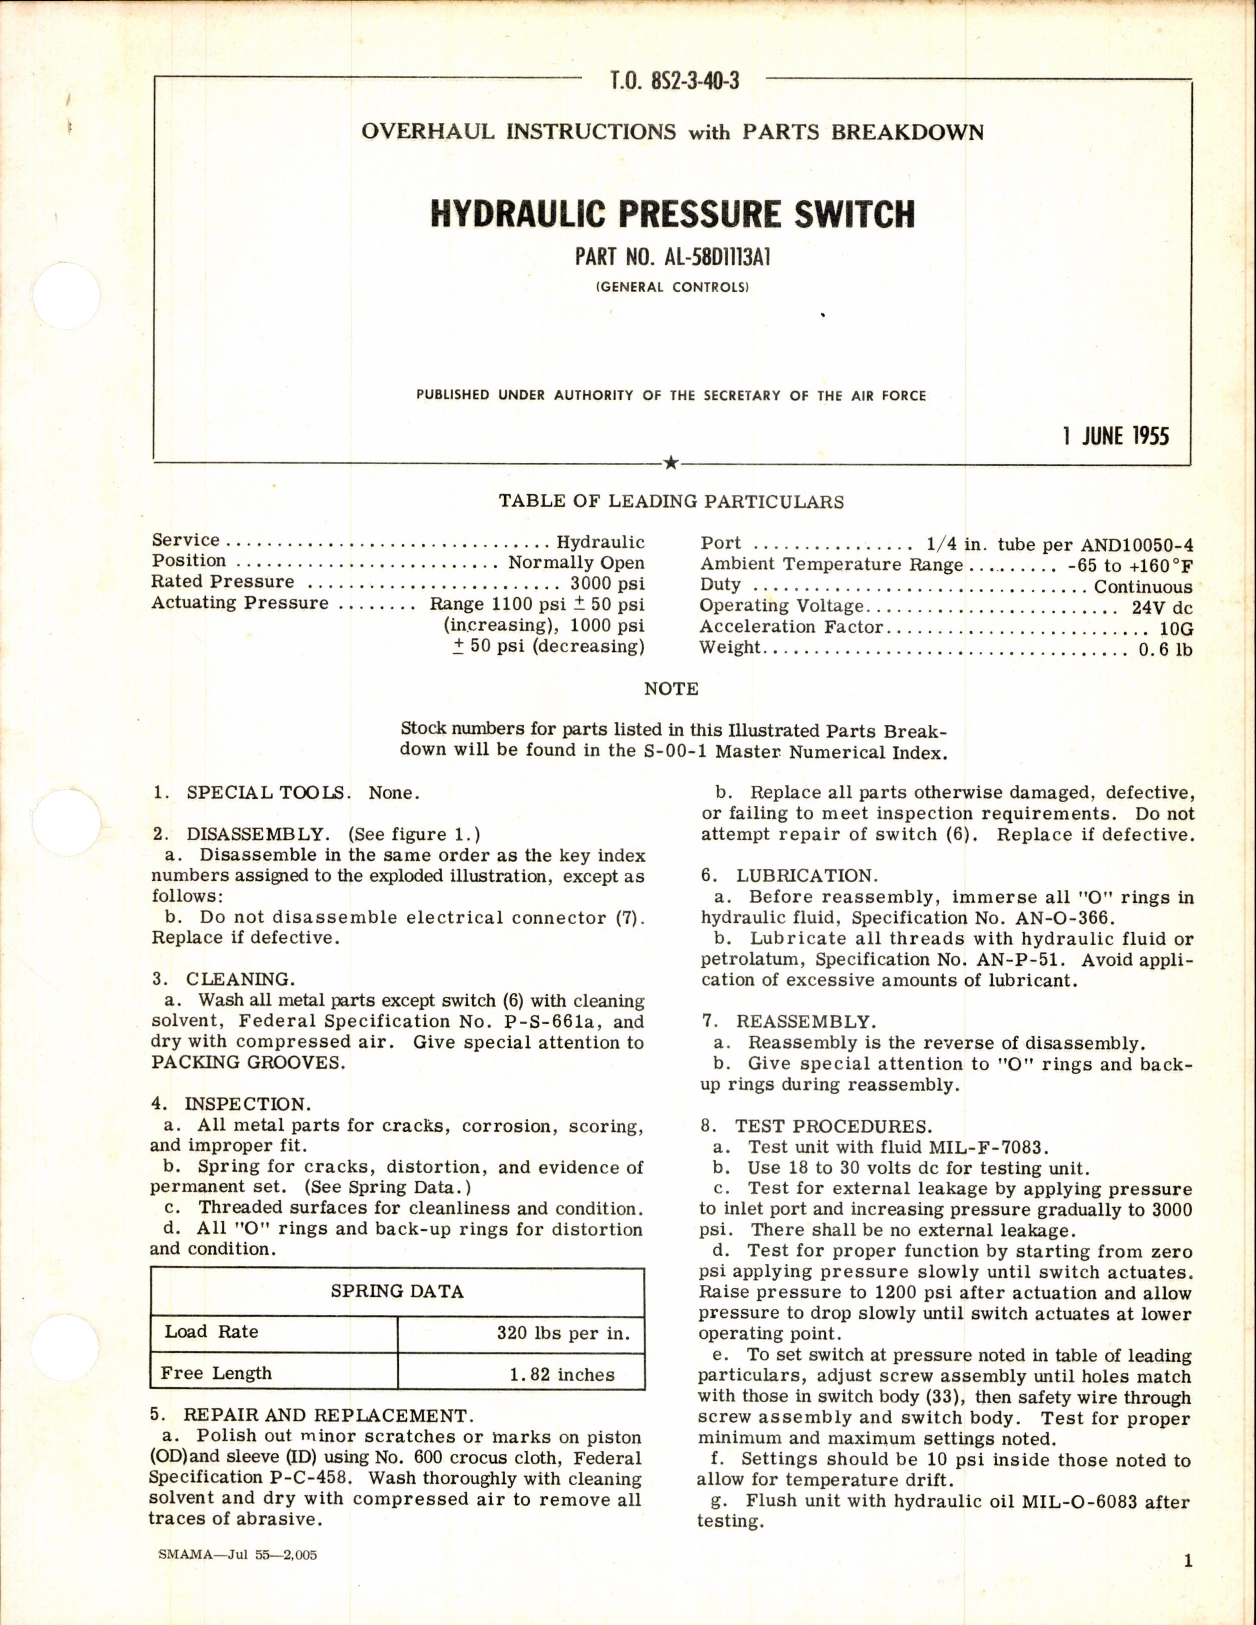 Sample page 1 from AirCorps Library document: Hydraulic Pressure Switch Part No AL-58D1113A1